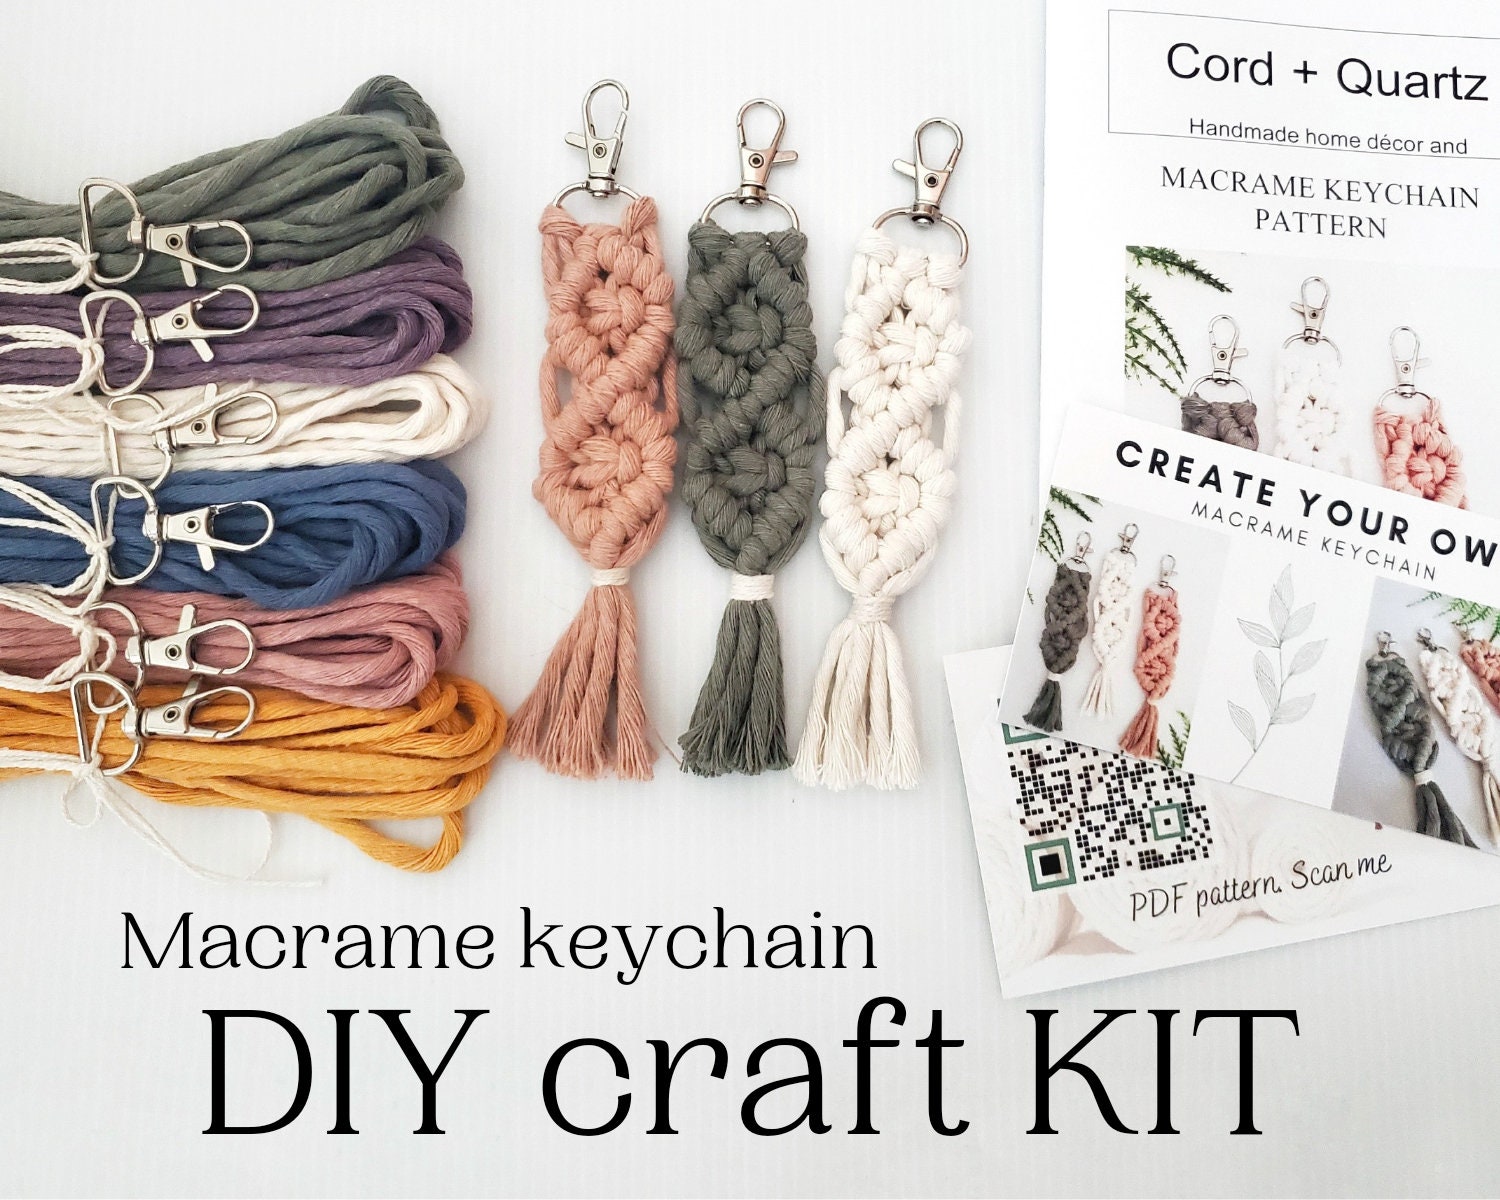 Crafting a Macramé Keychain: A Step-by-Step Guide for Beginners